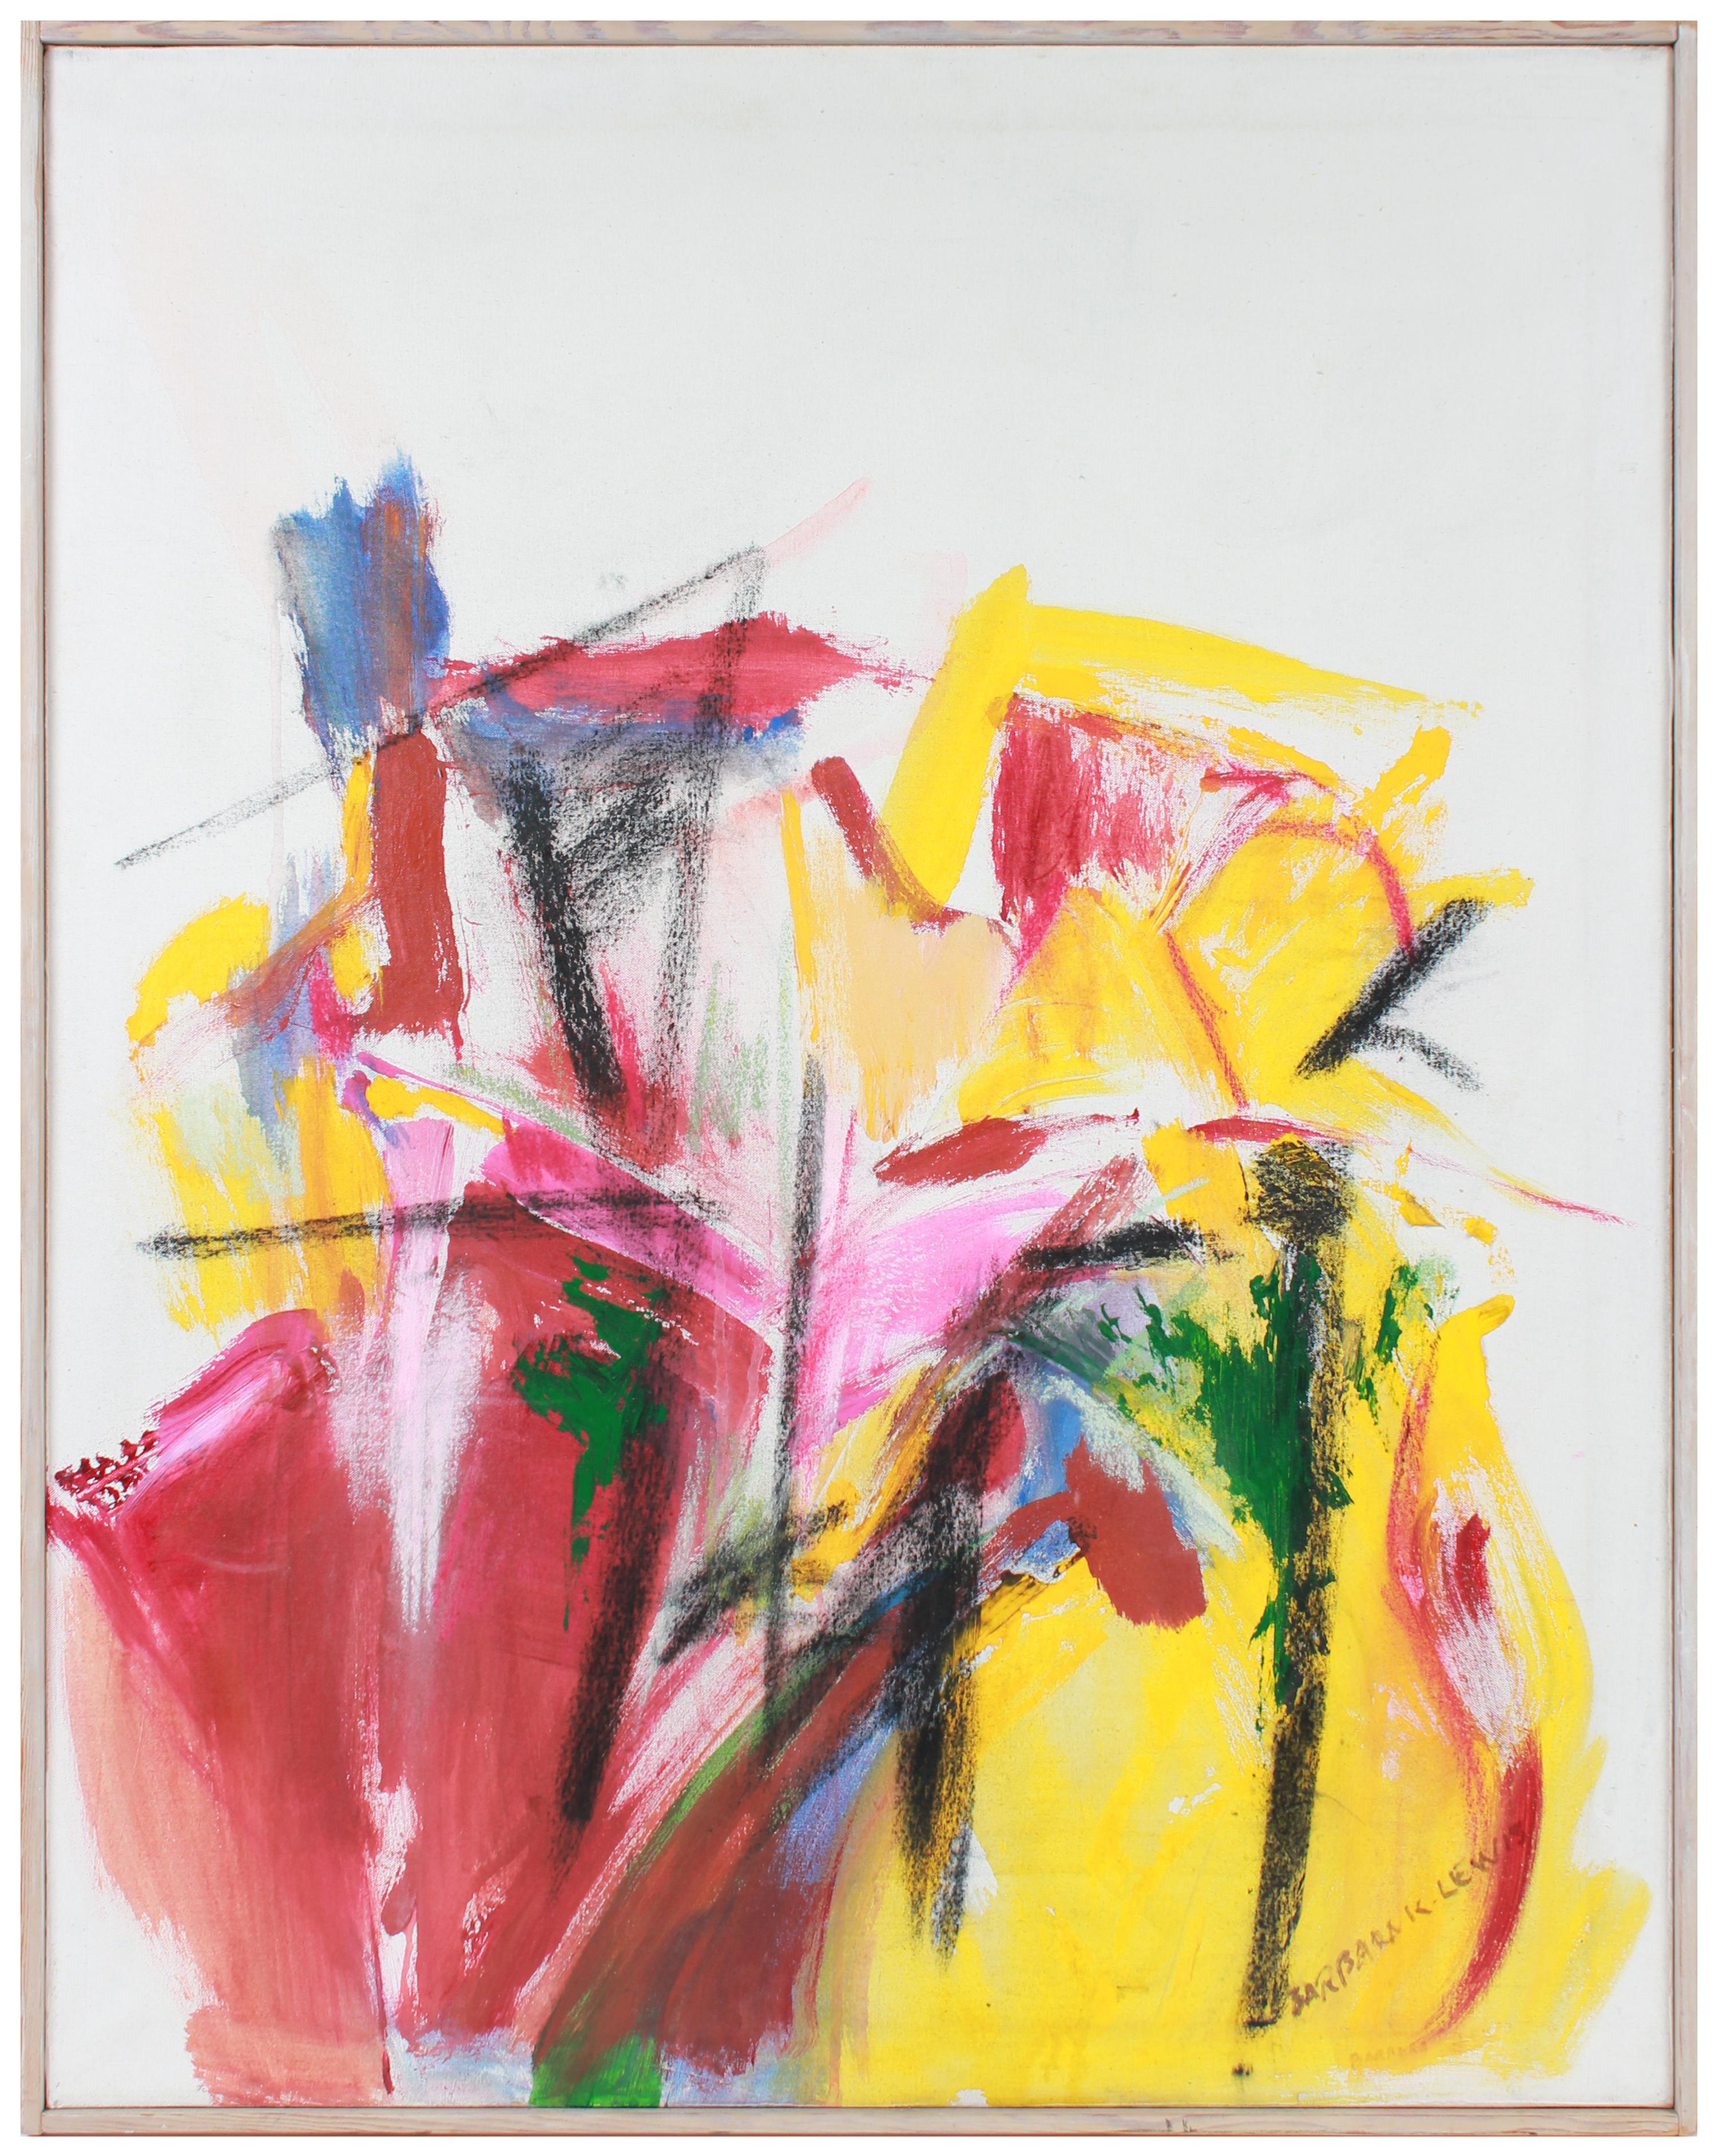 Barbara Lewis Abstract Drawing - "Summer Garden" Bright Acrylic & Charcoal Abstract Expressionist Painting